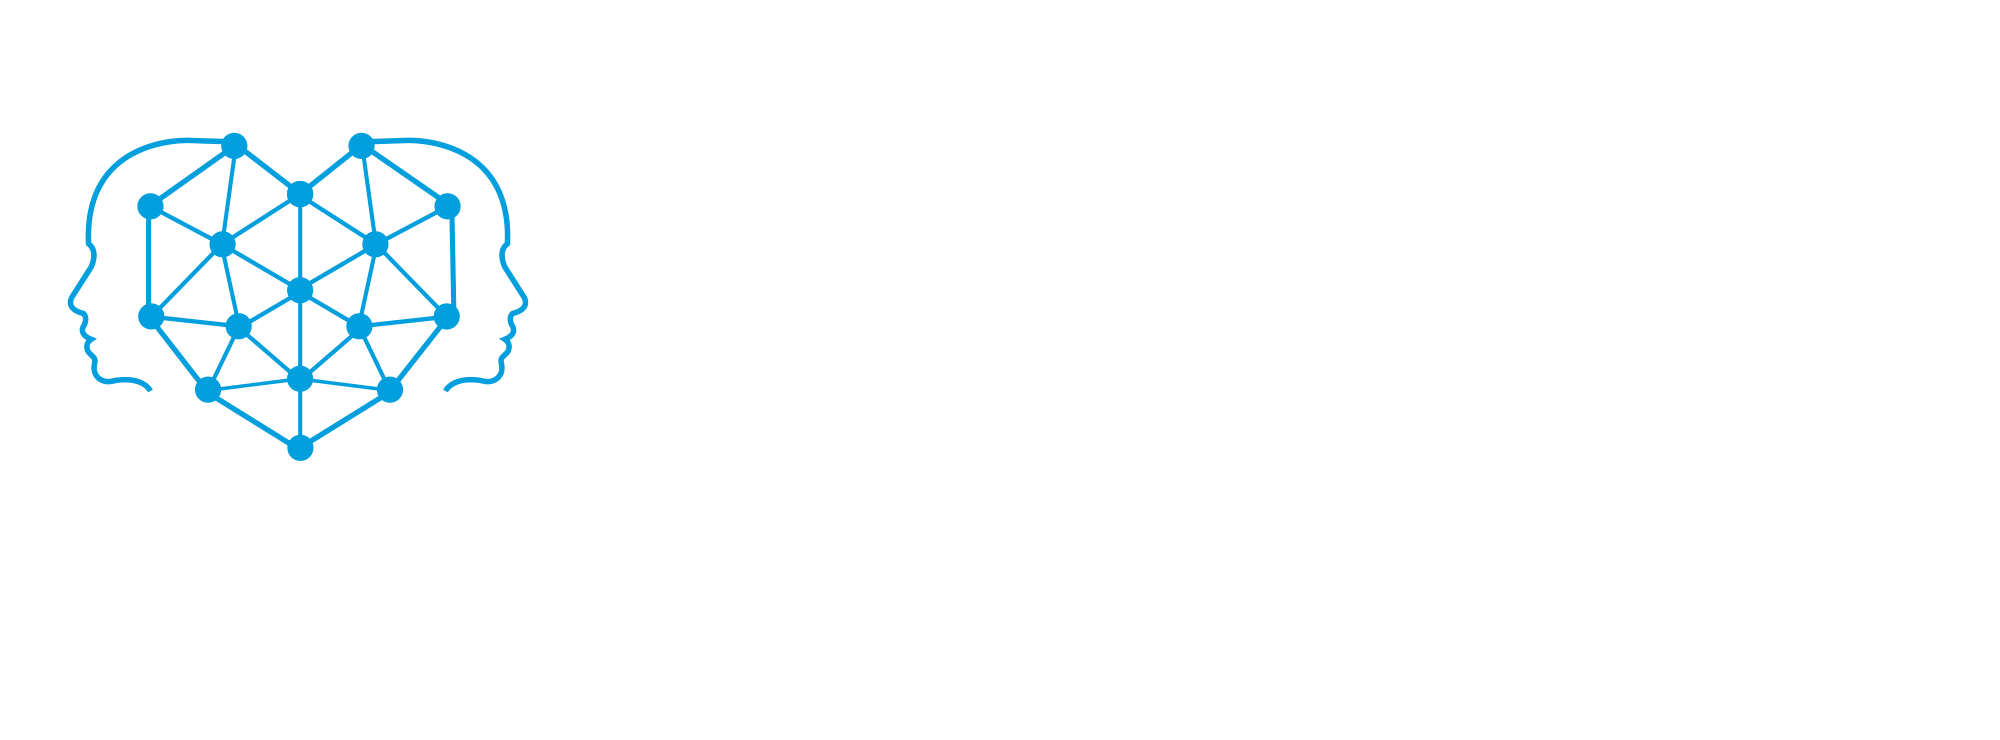 The Computational Health and Interaction lab banner